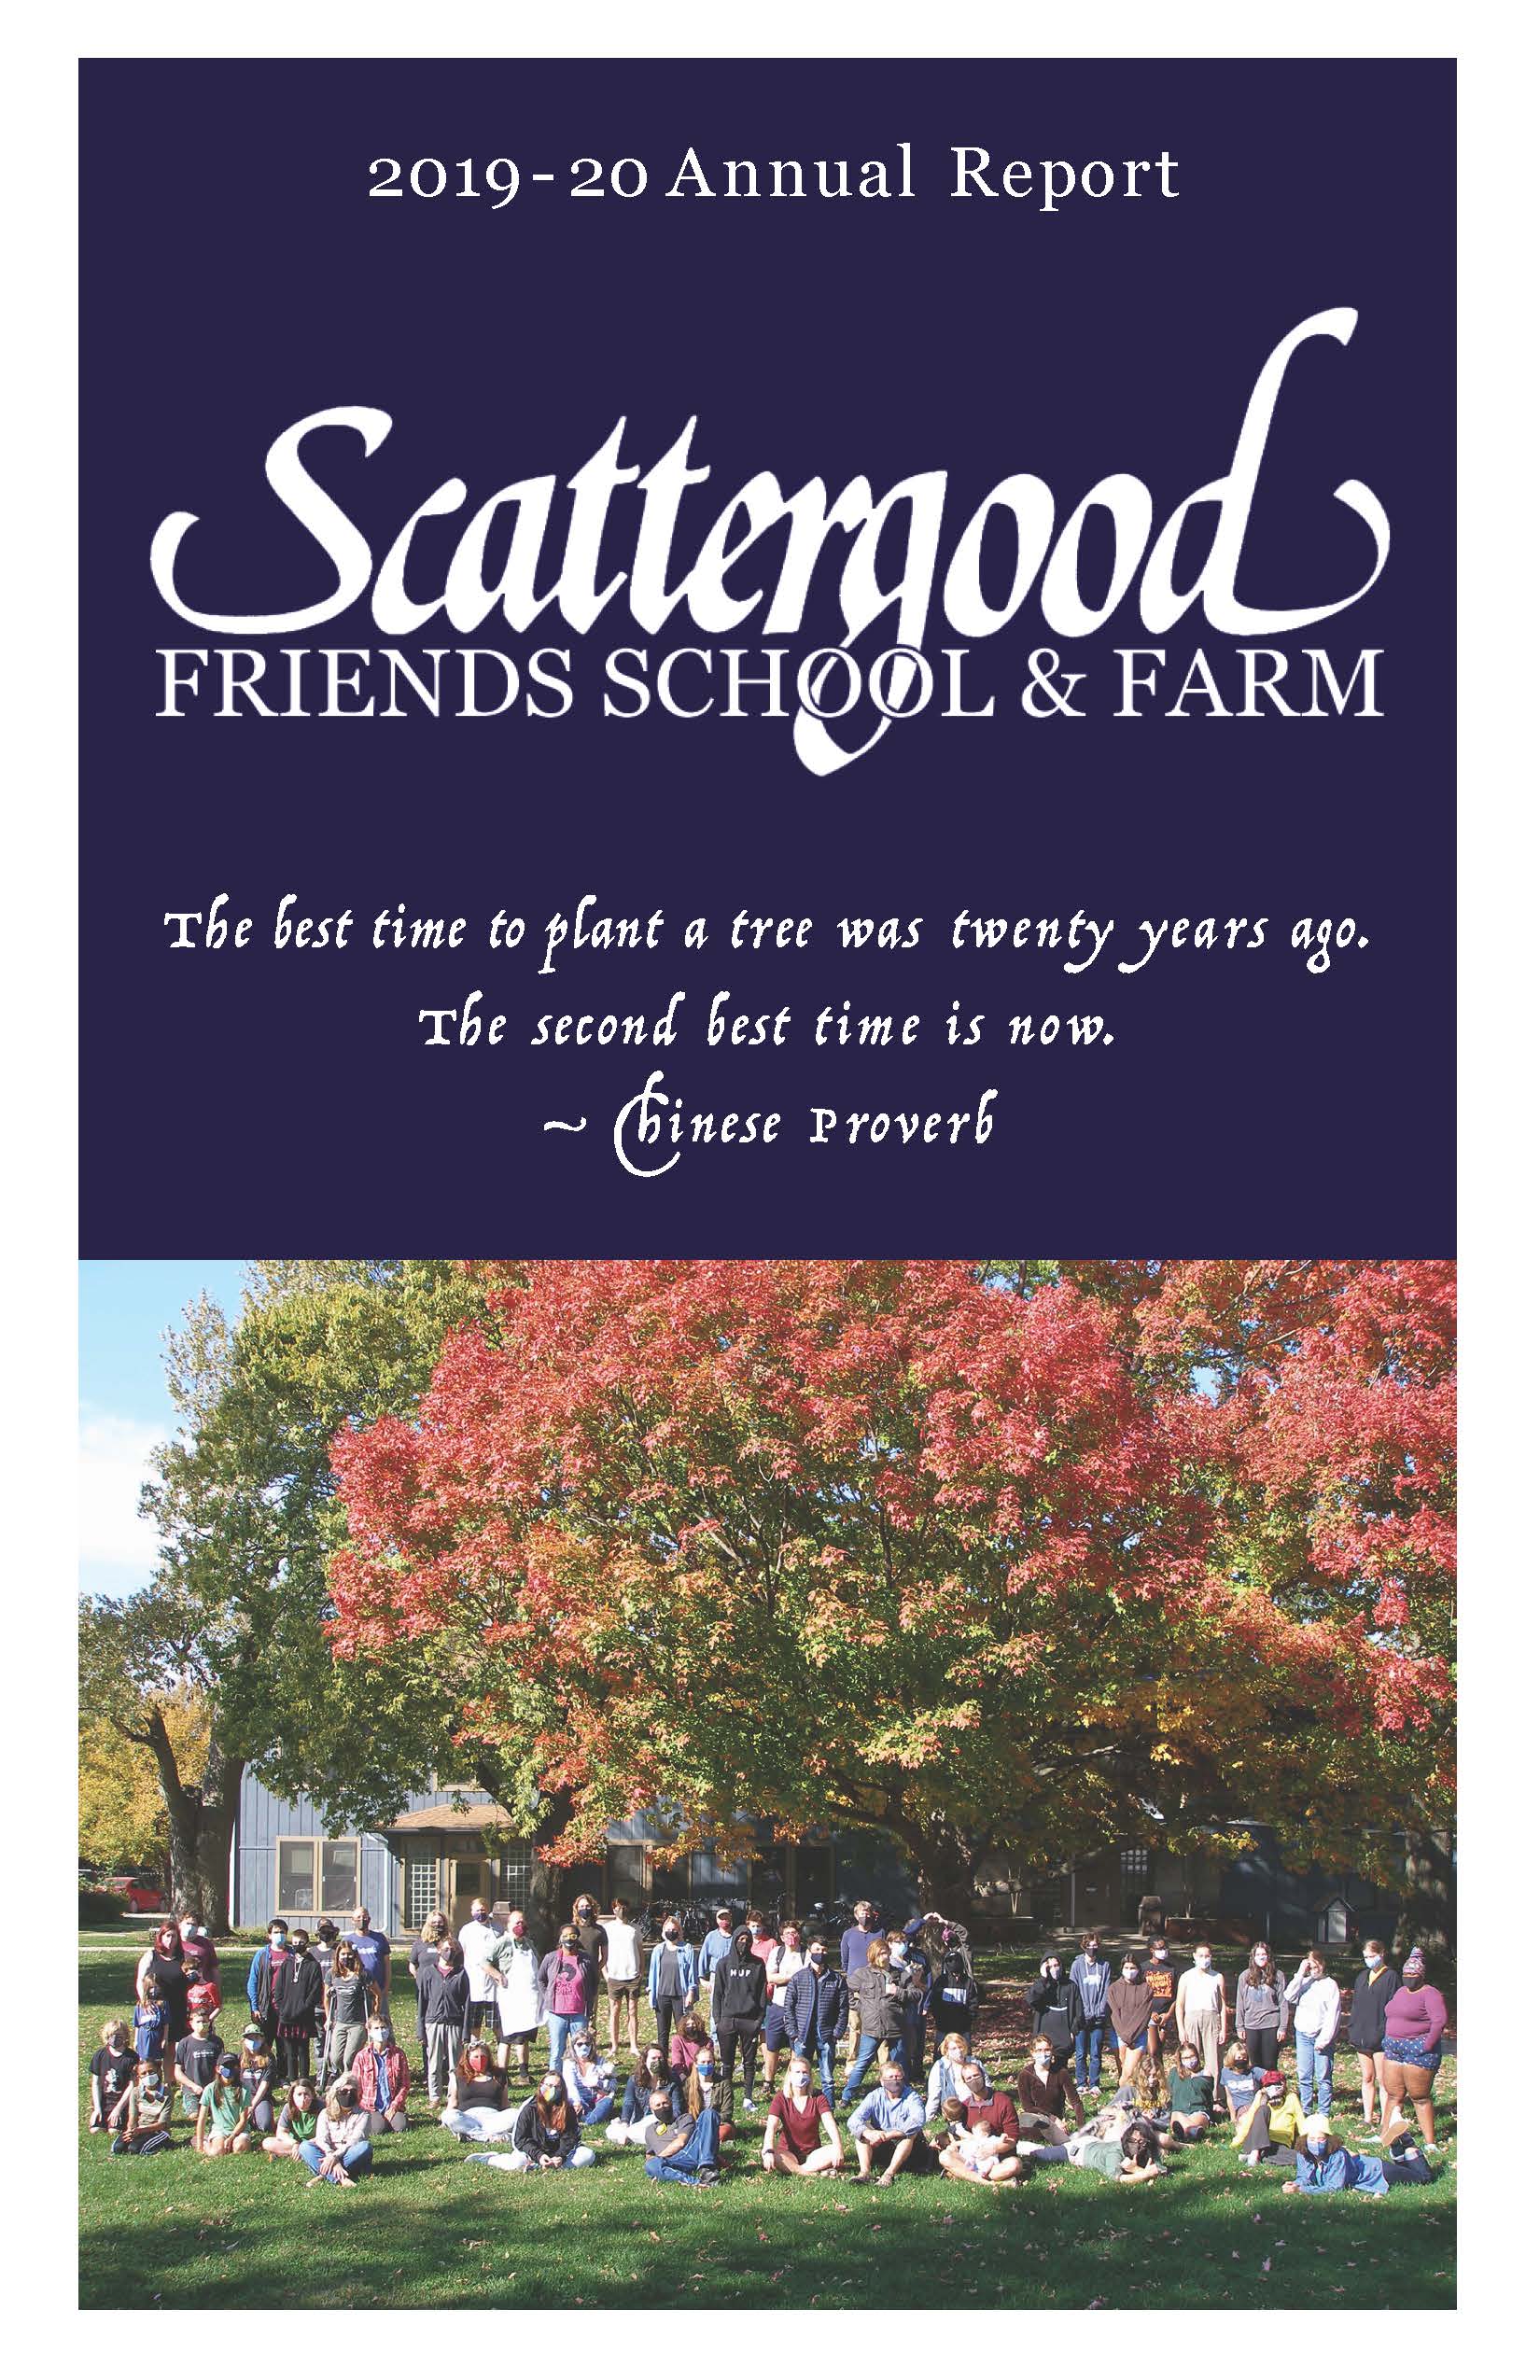 Scattergood-Annual-Report-2019-2020 Cover